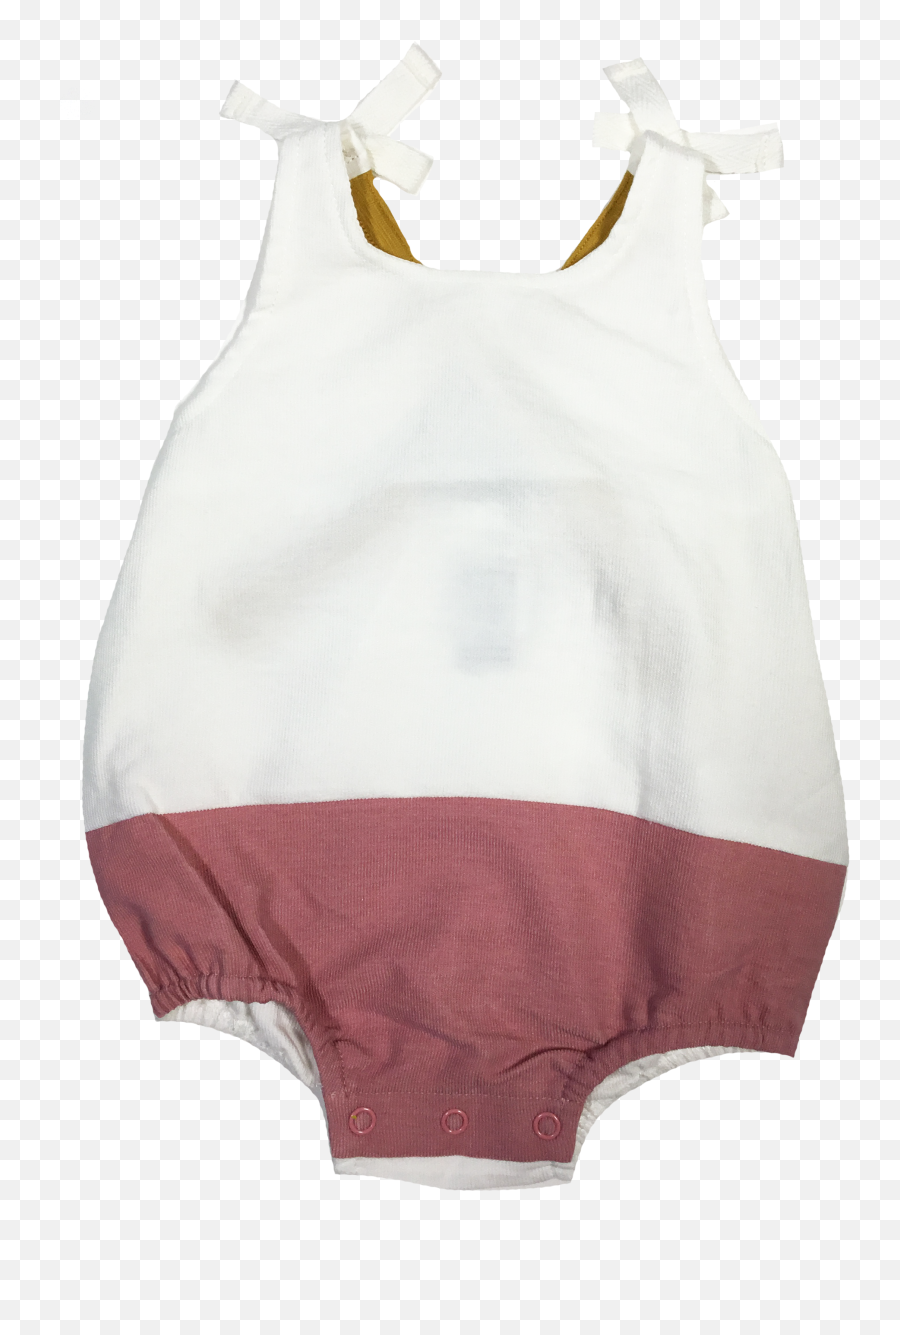 Piece Of Tape Png - Swimsuit,Piece Of Tape Png